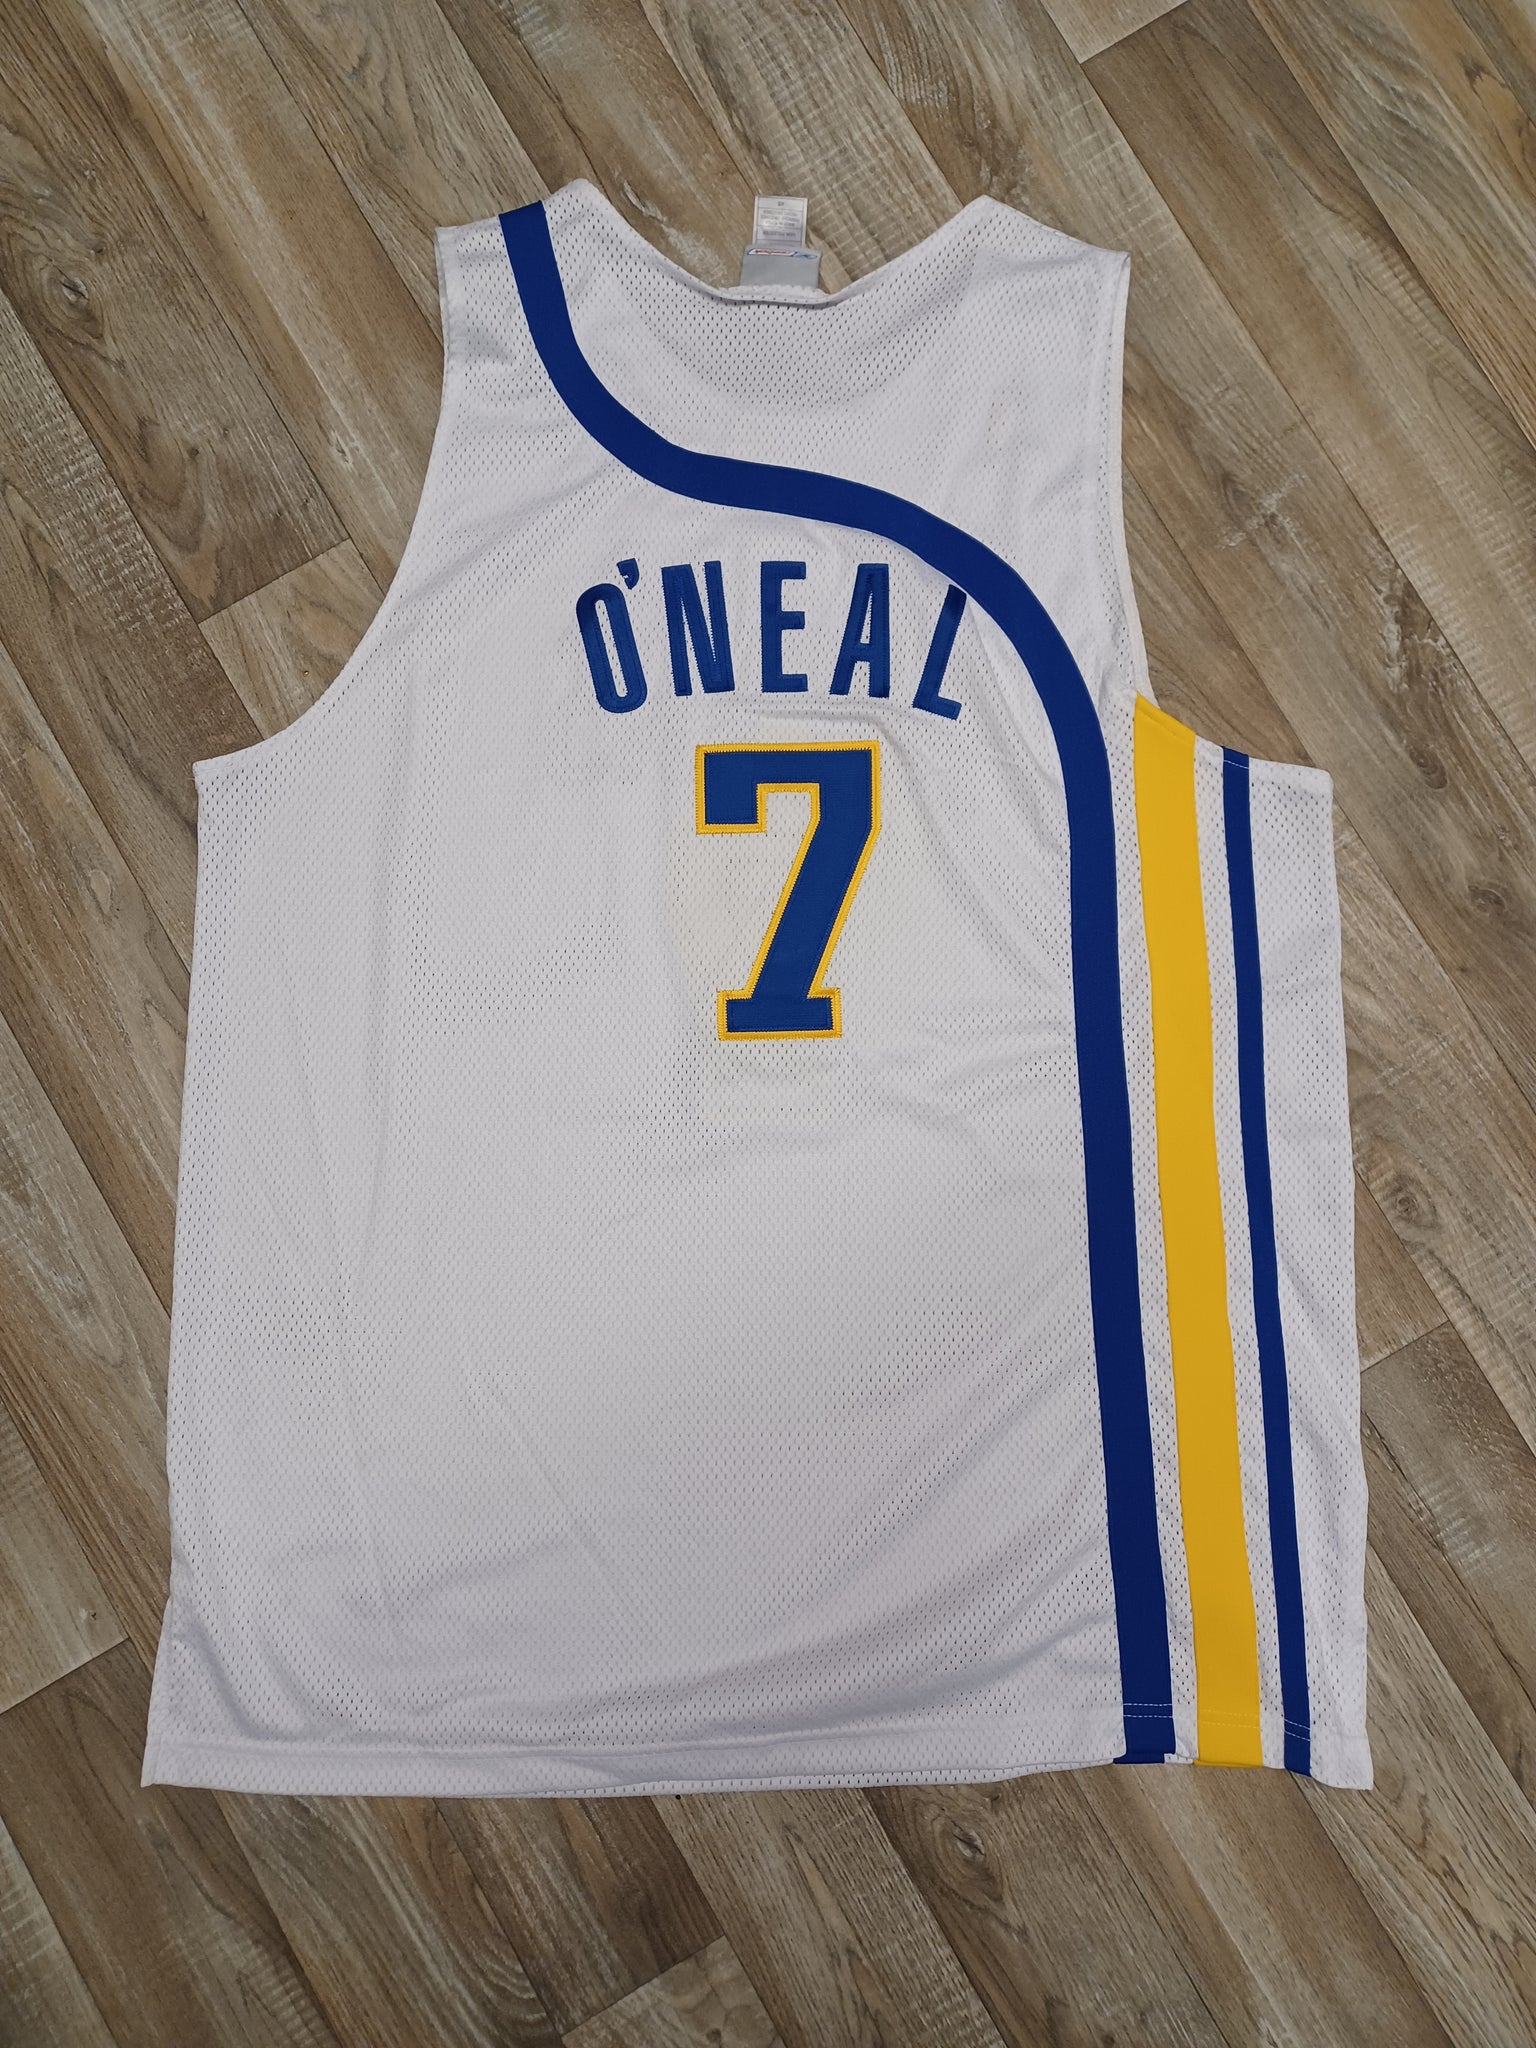 1972 INDIANA PACERS O'NEAL NIKE REWIND JERSEY (ALTERNATE) XL